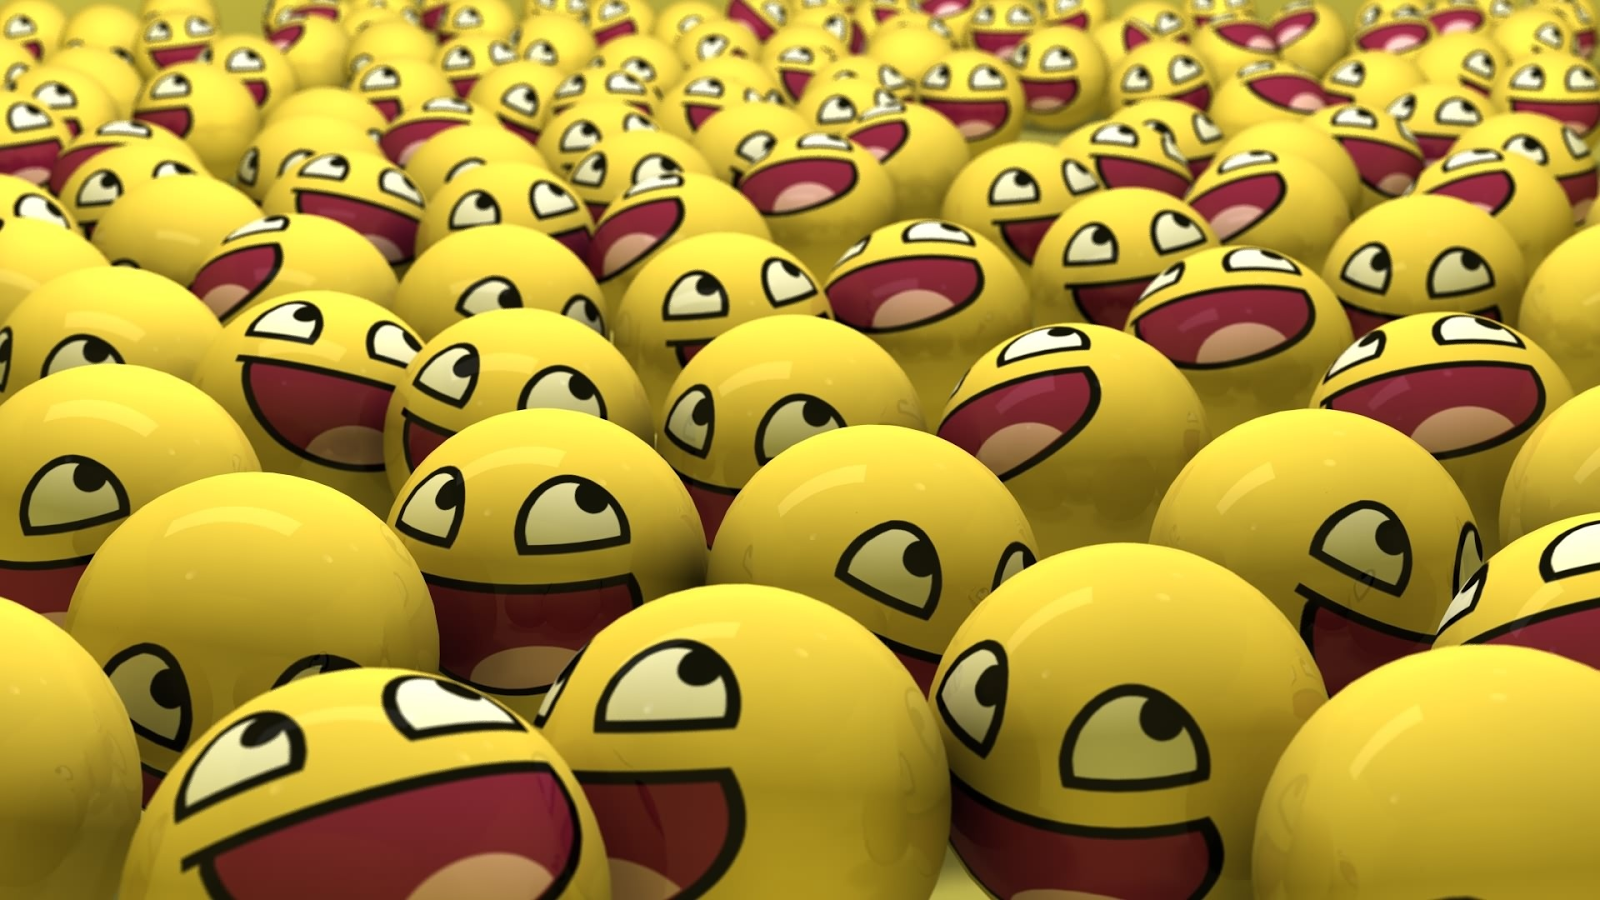 Pics For Emoji Faces Background Funny Wallpaper